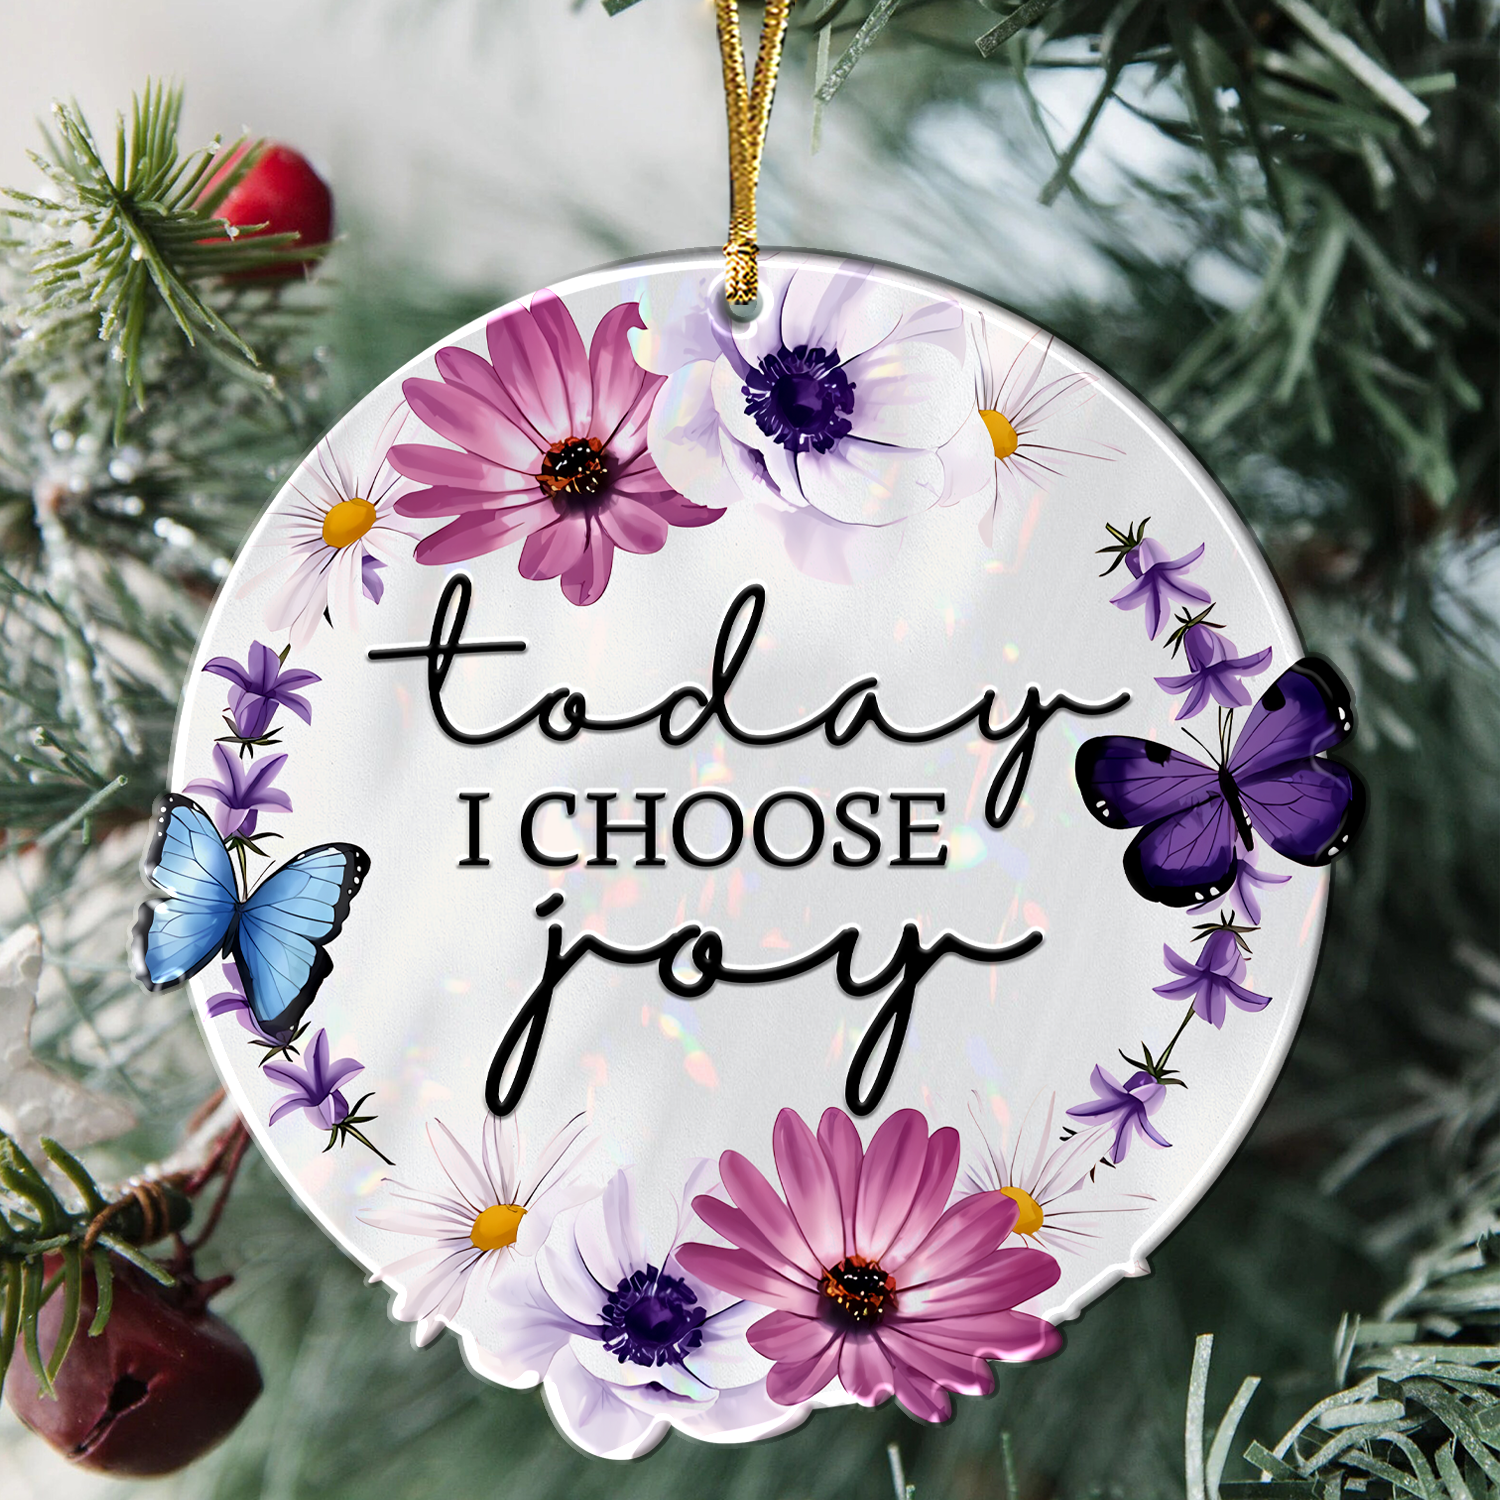 Daisy Flower Today I Choose Joy Christian Gifts For Women, Birthday Gifts For Women, Ornament Gift, Christmas Ornament Car Hanging